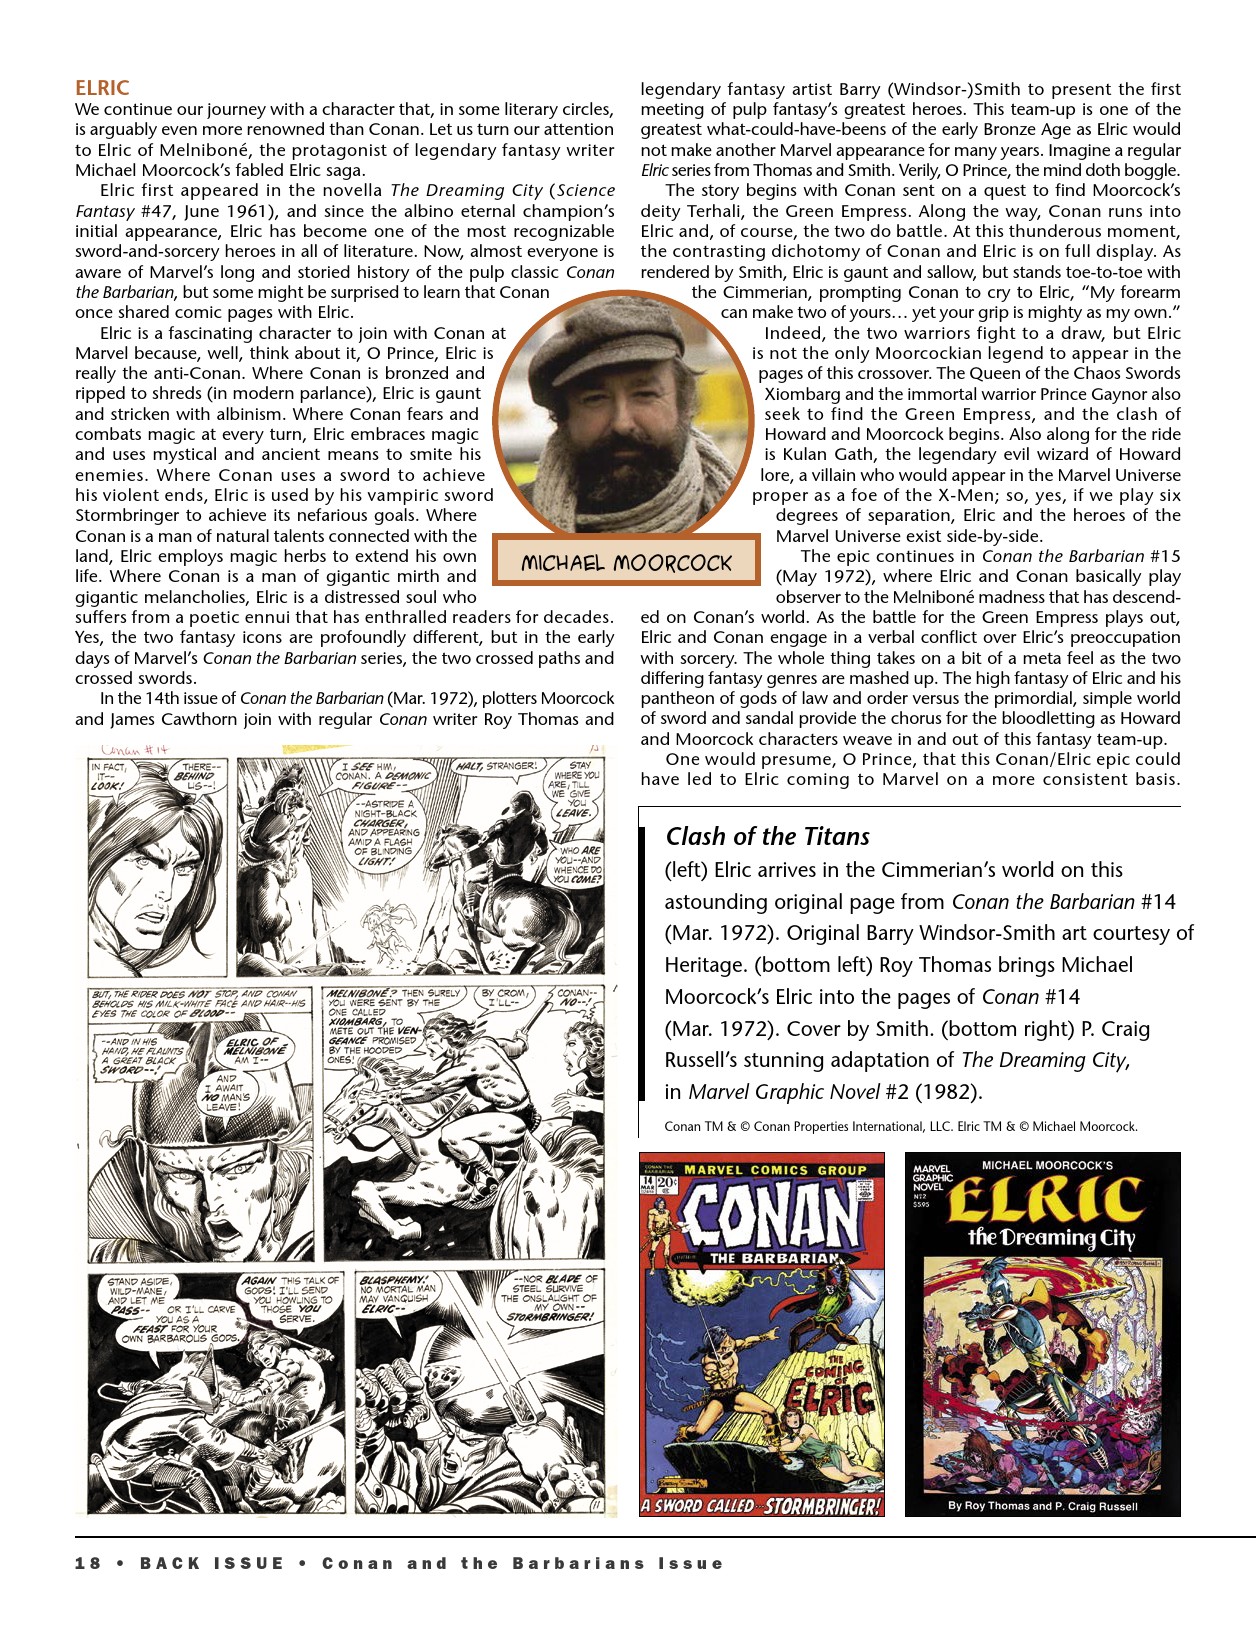 Read online Back Issue comic -  Issue #121 - 20